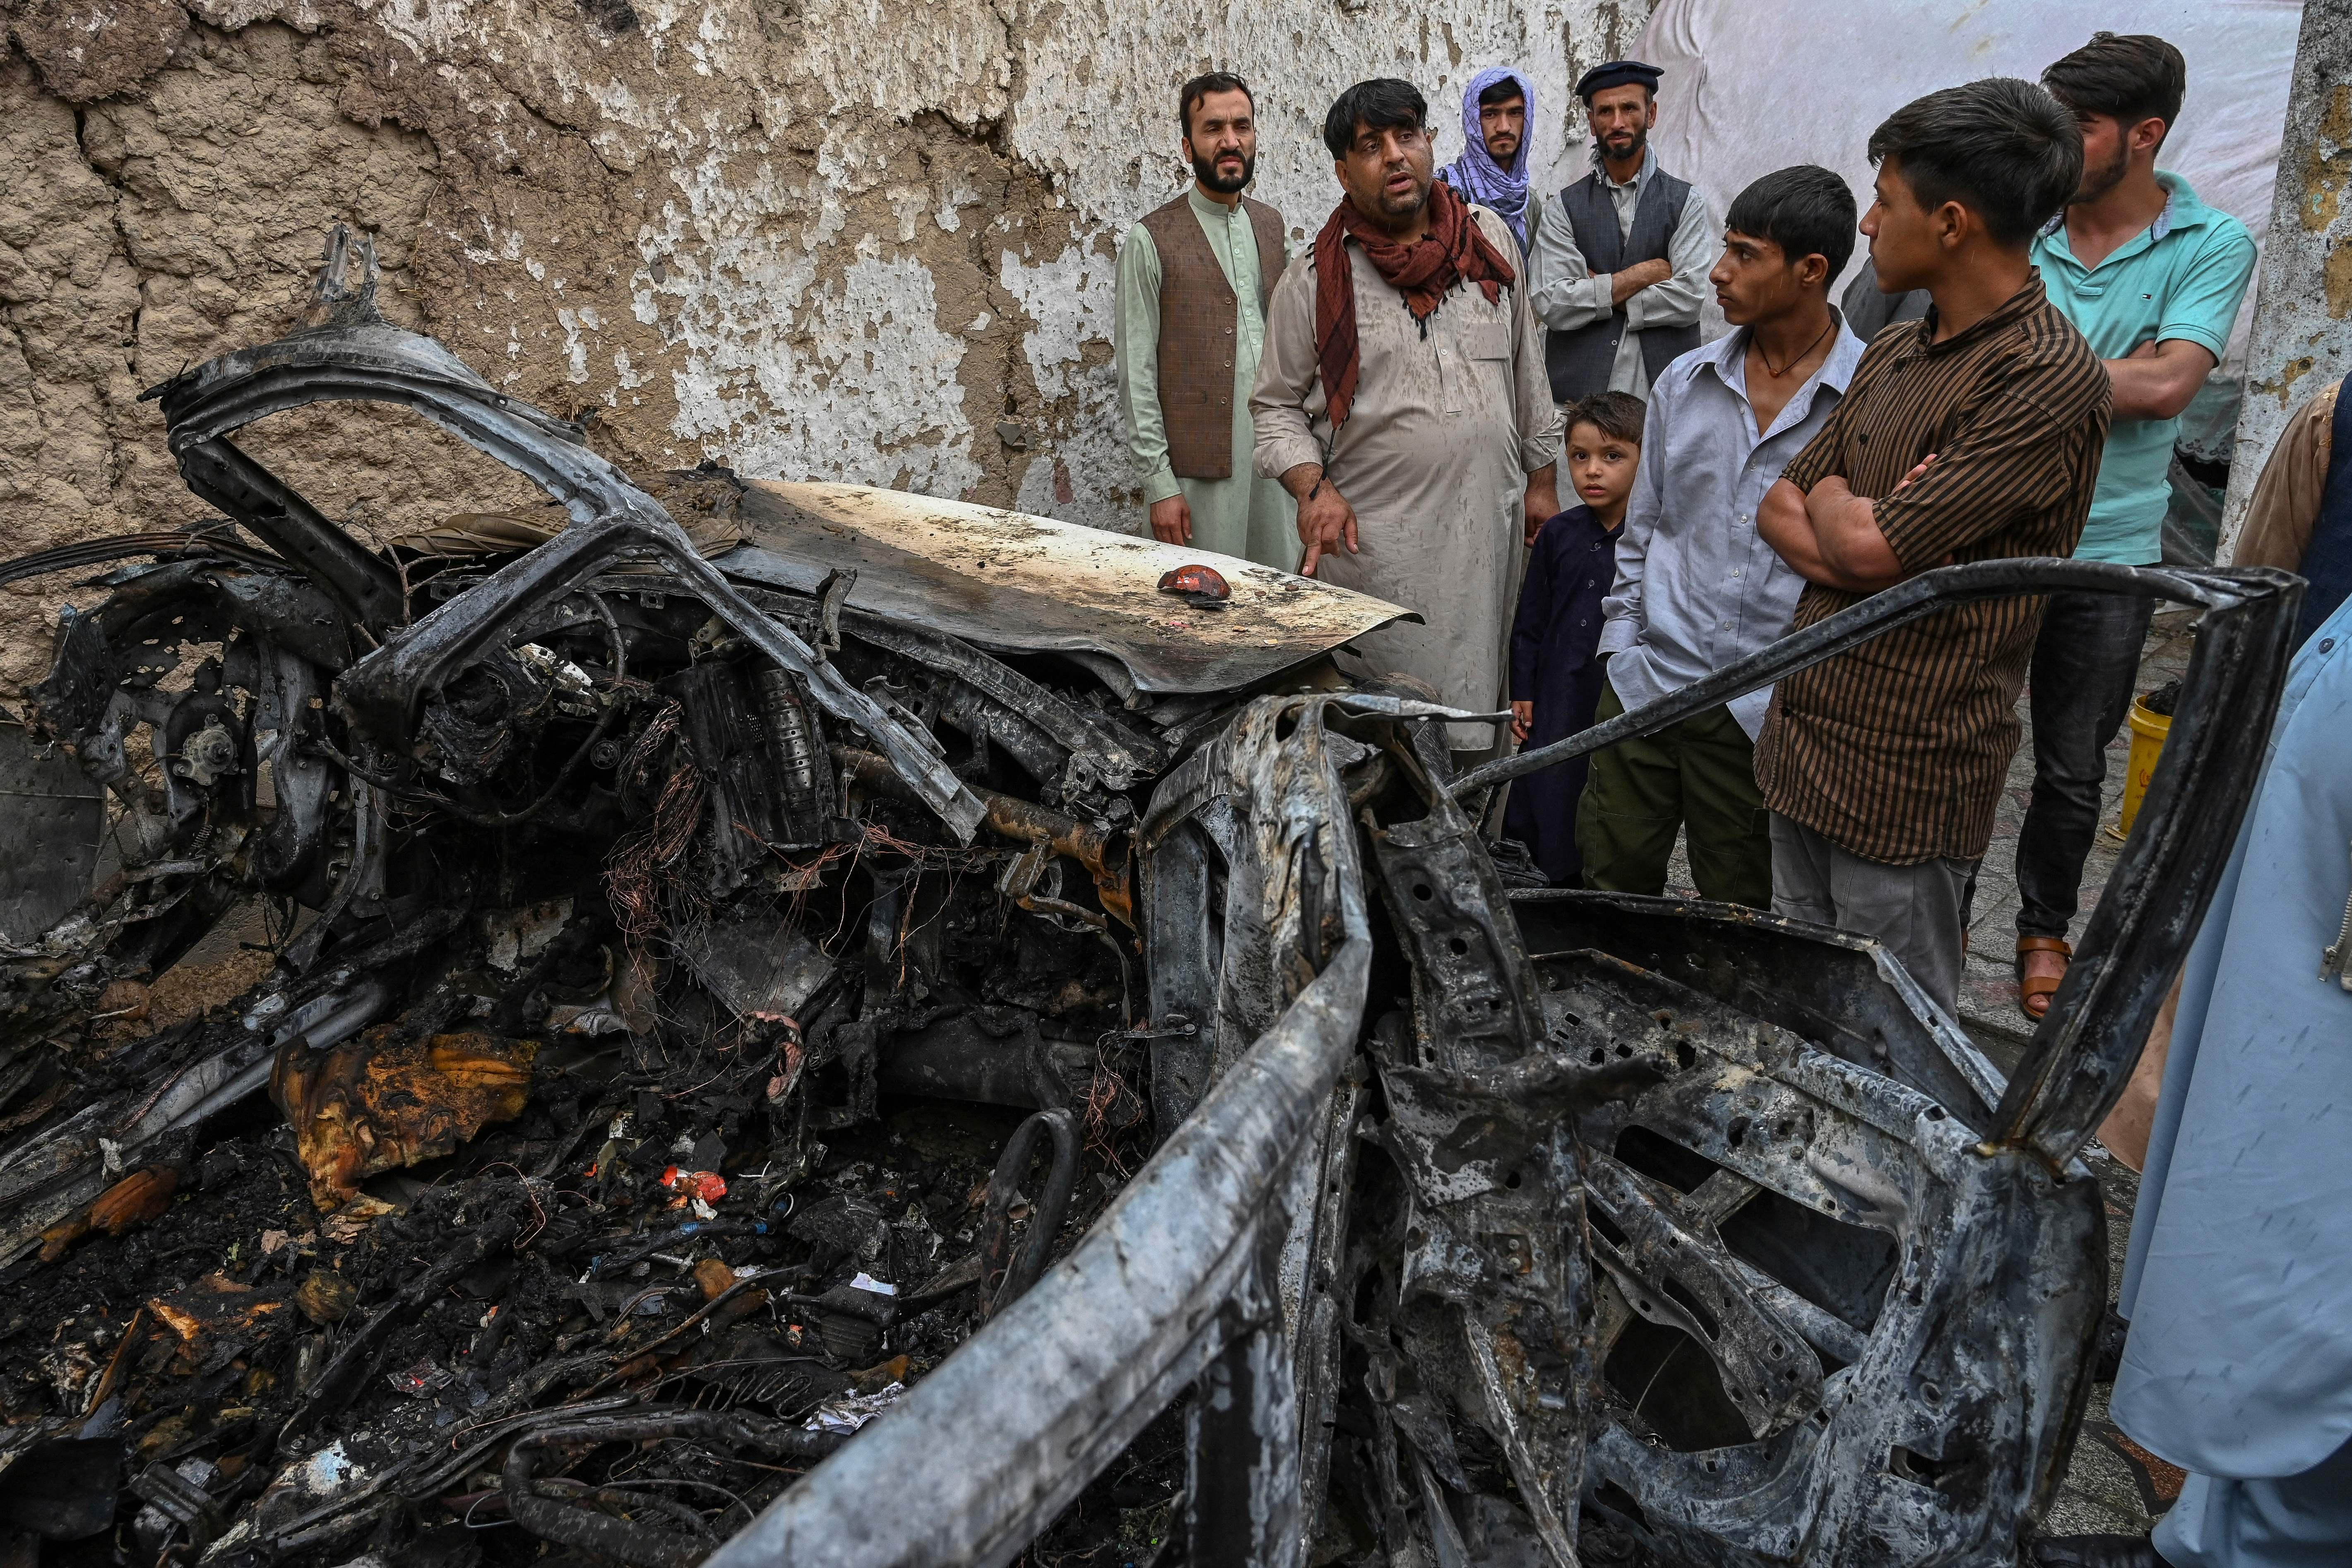 Afghan residents and family members of the victims gather next to a damaged vehicle inside a house, day after a US drone airstrike in Kabul on August 30, 2021. (Photo by WAKIL KOHSAR / AFP) (Photo by WAKIL KOHSAR/AFP via Getty Images)